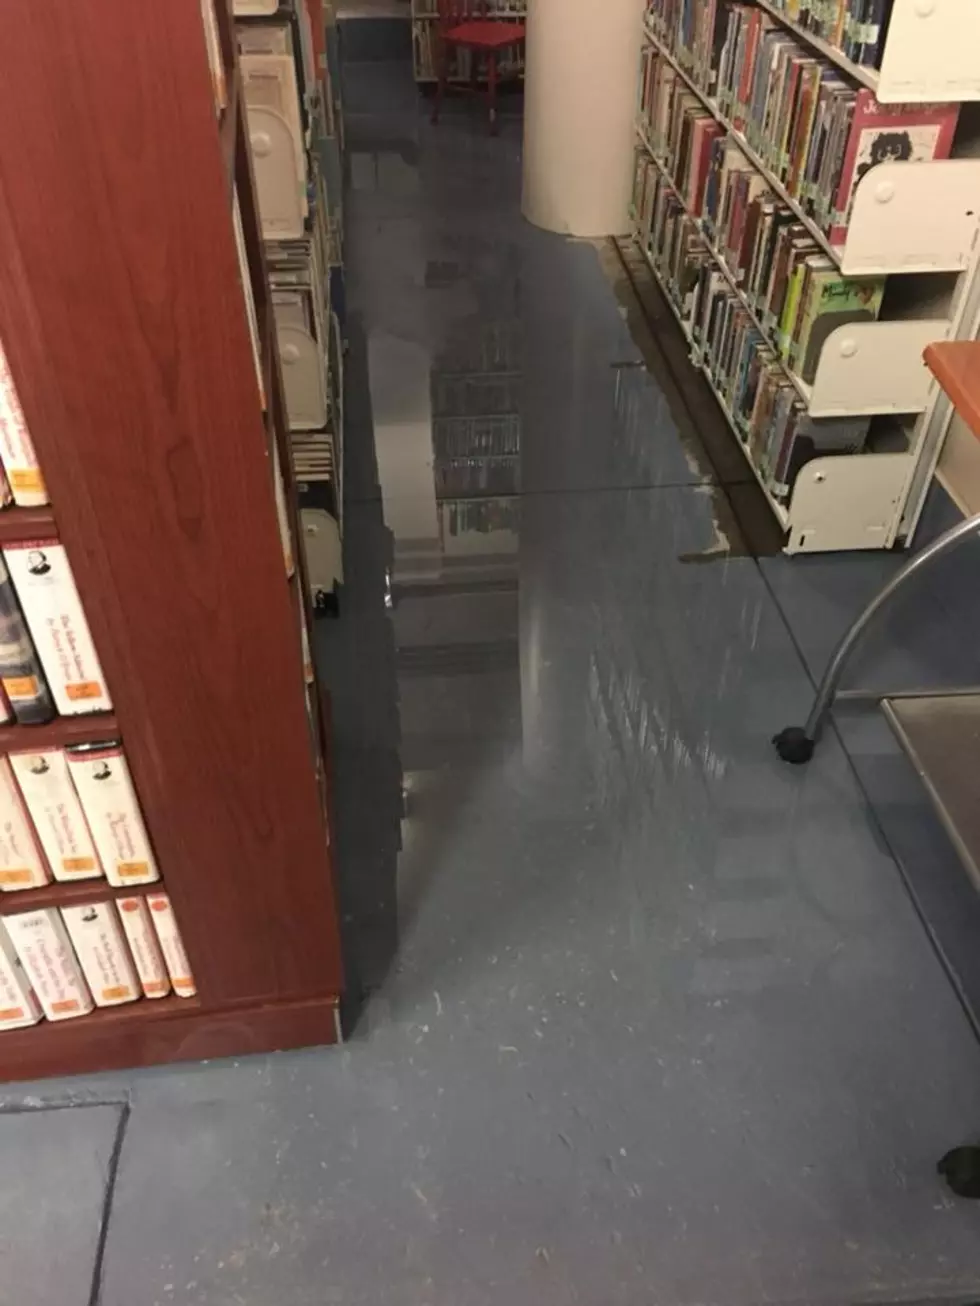 Flooding Causes Changes at the Jesup Library